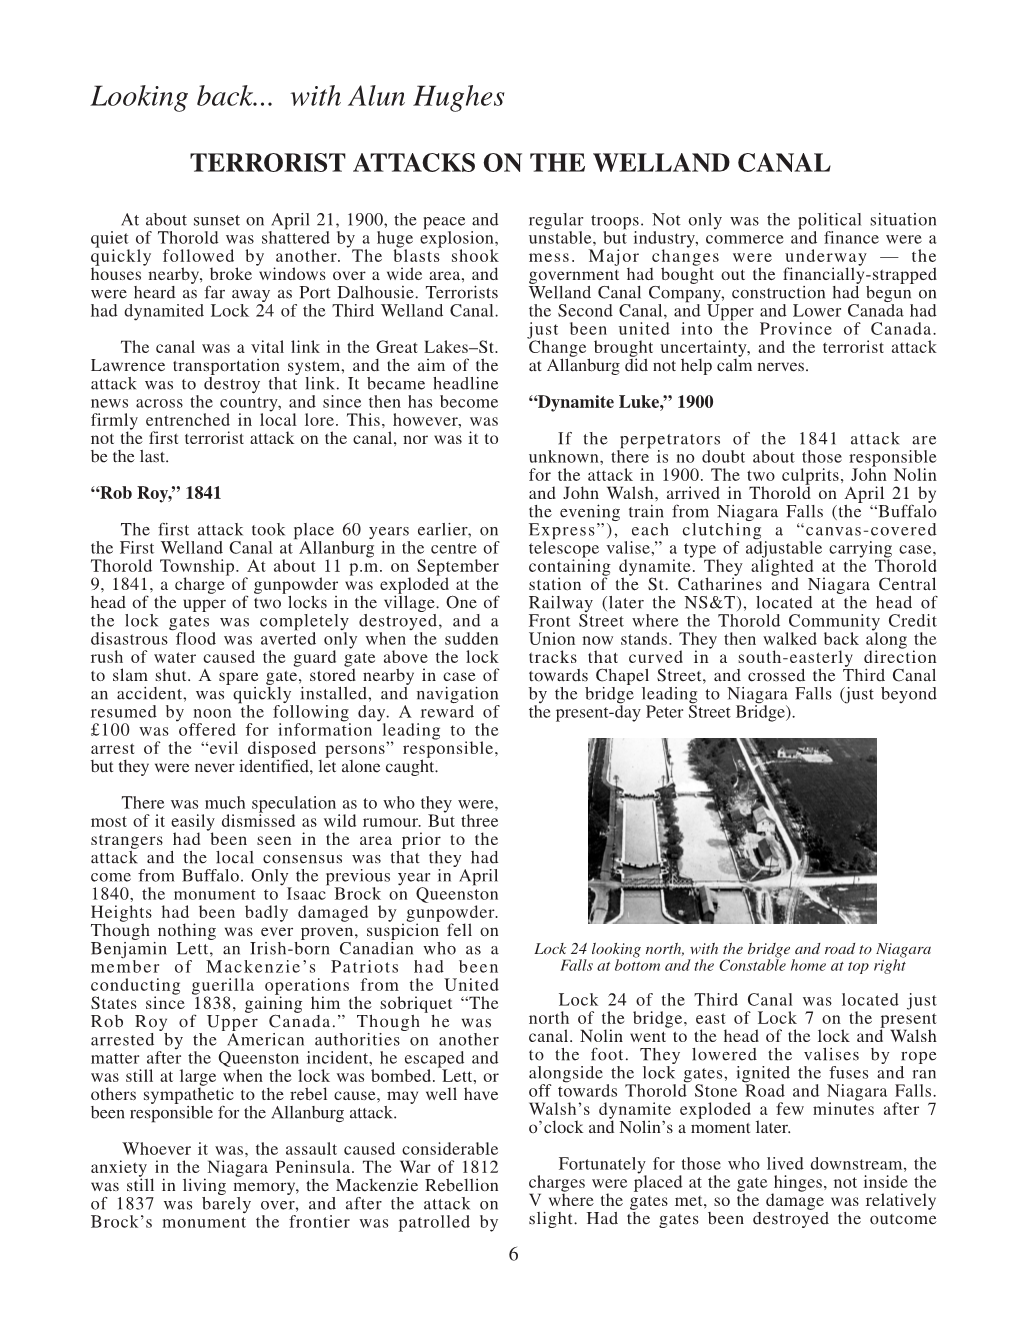 Terrorist Attacks on the Welland Canal.FH11